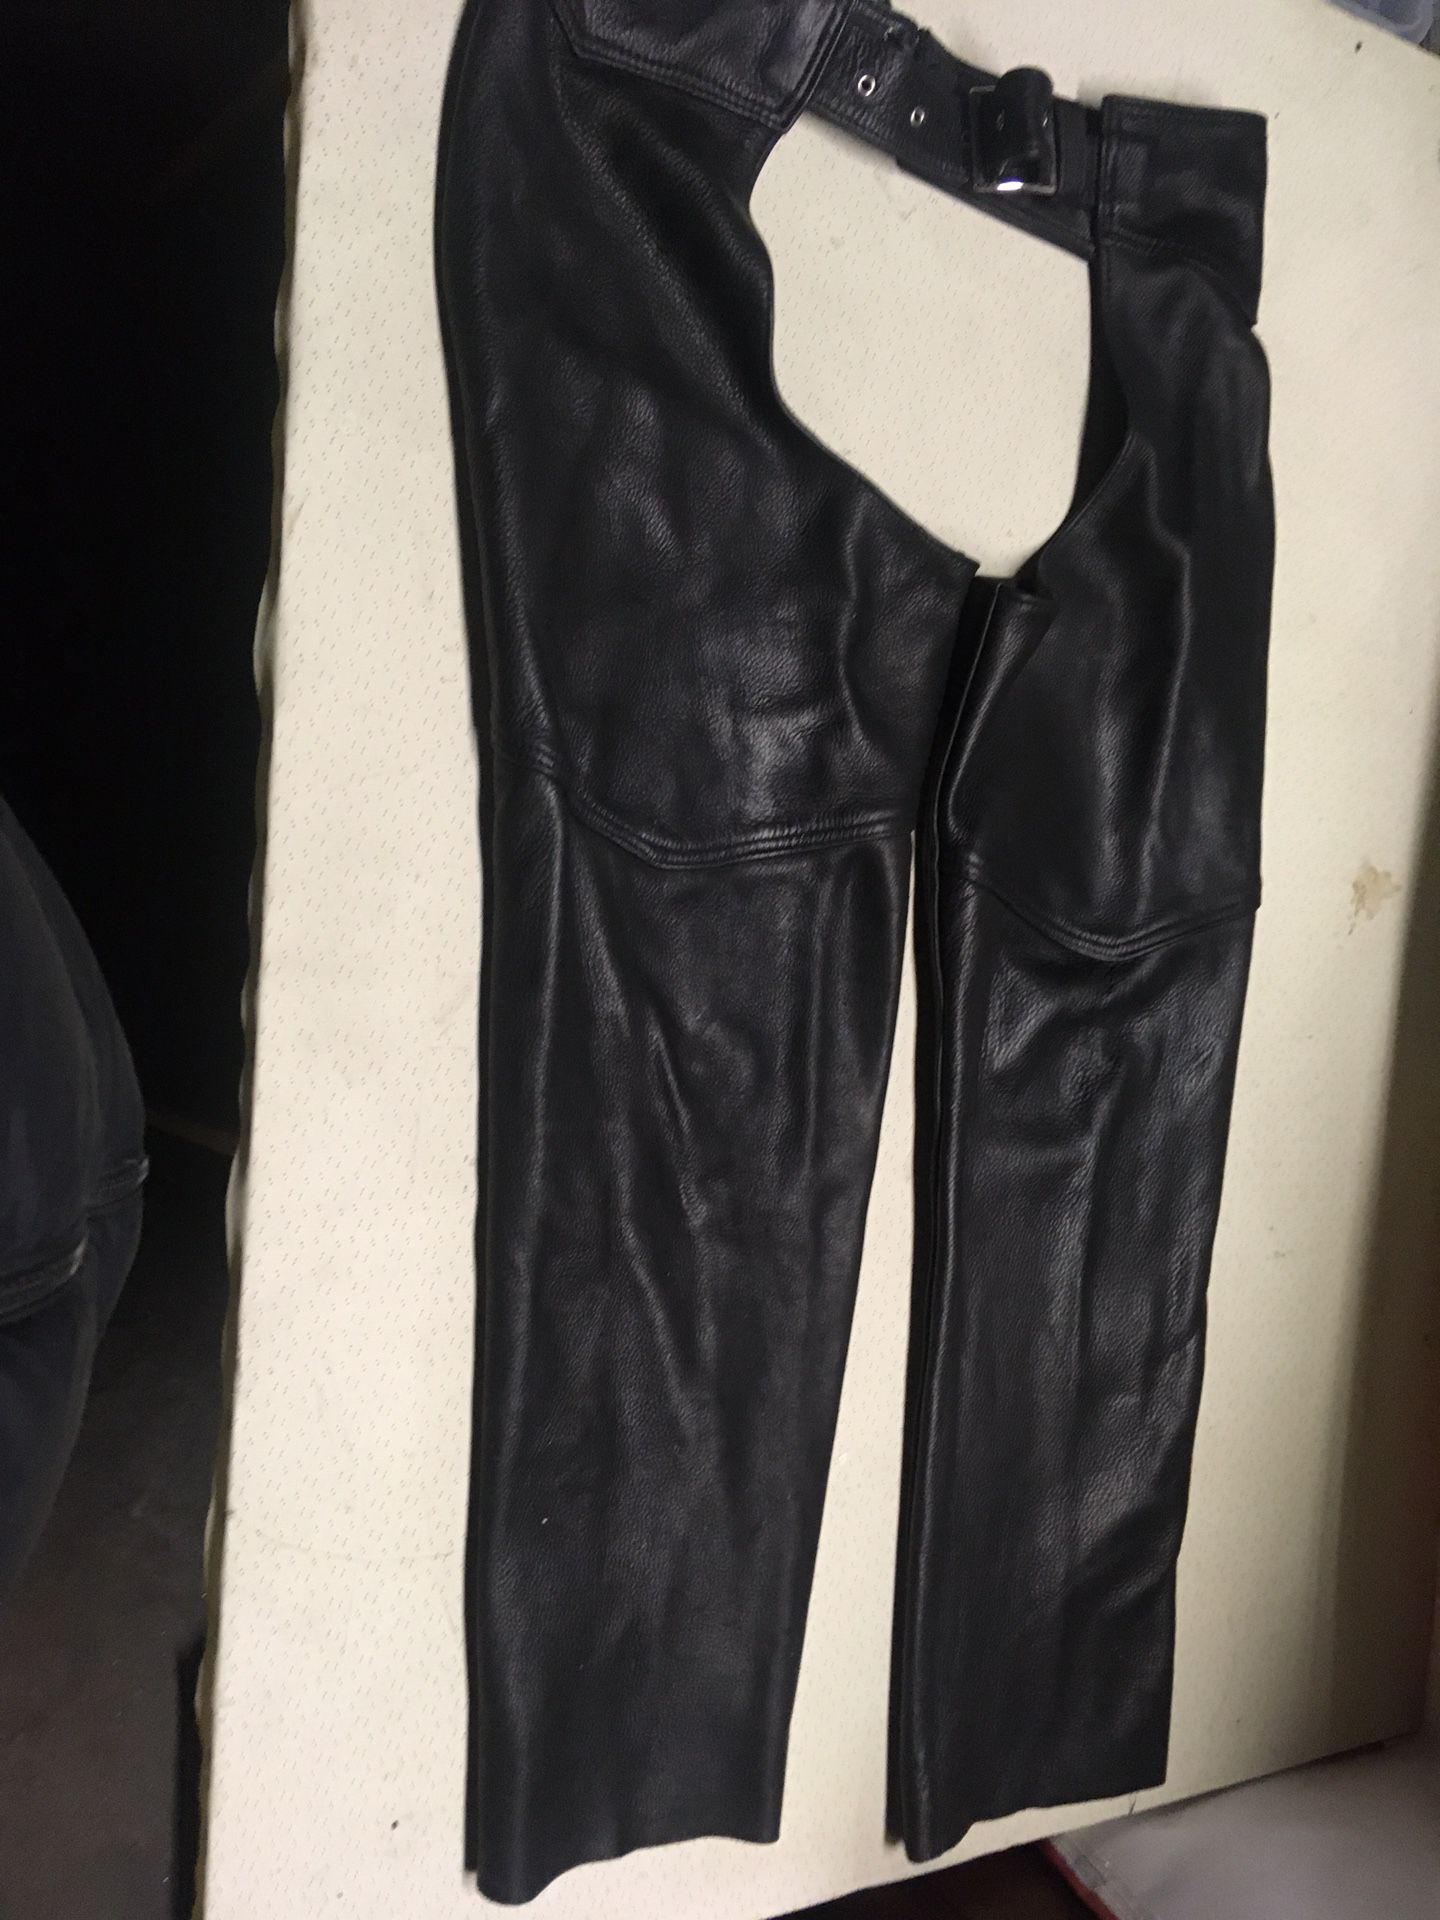 Women’s leather motorcycle chaps